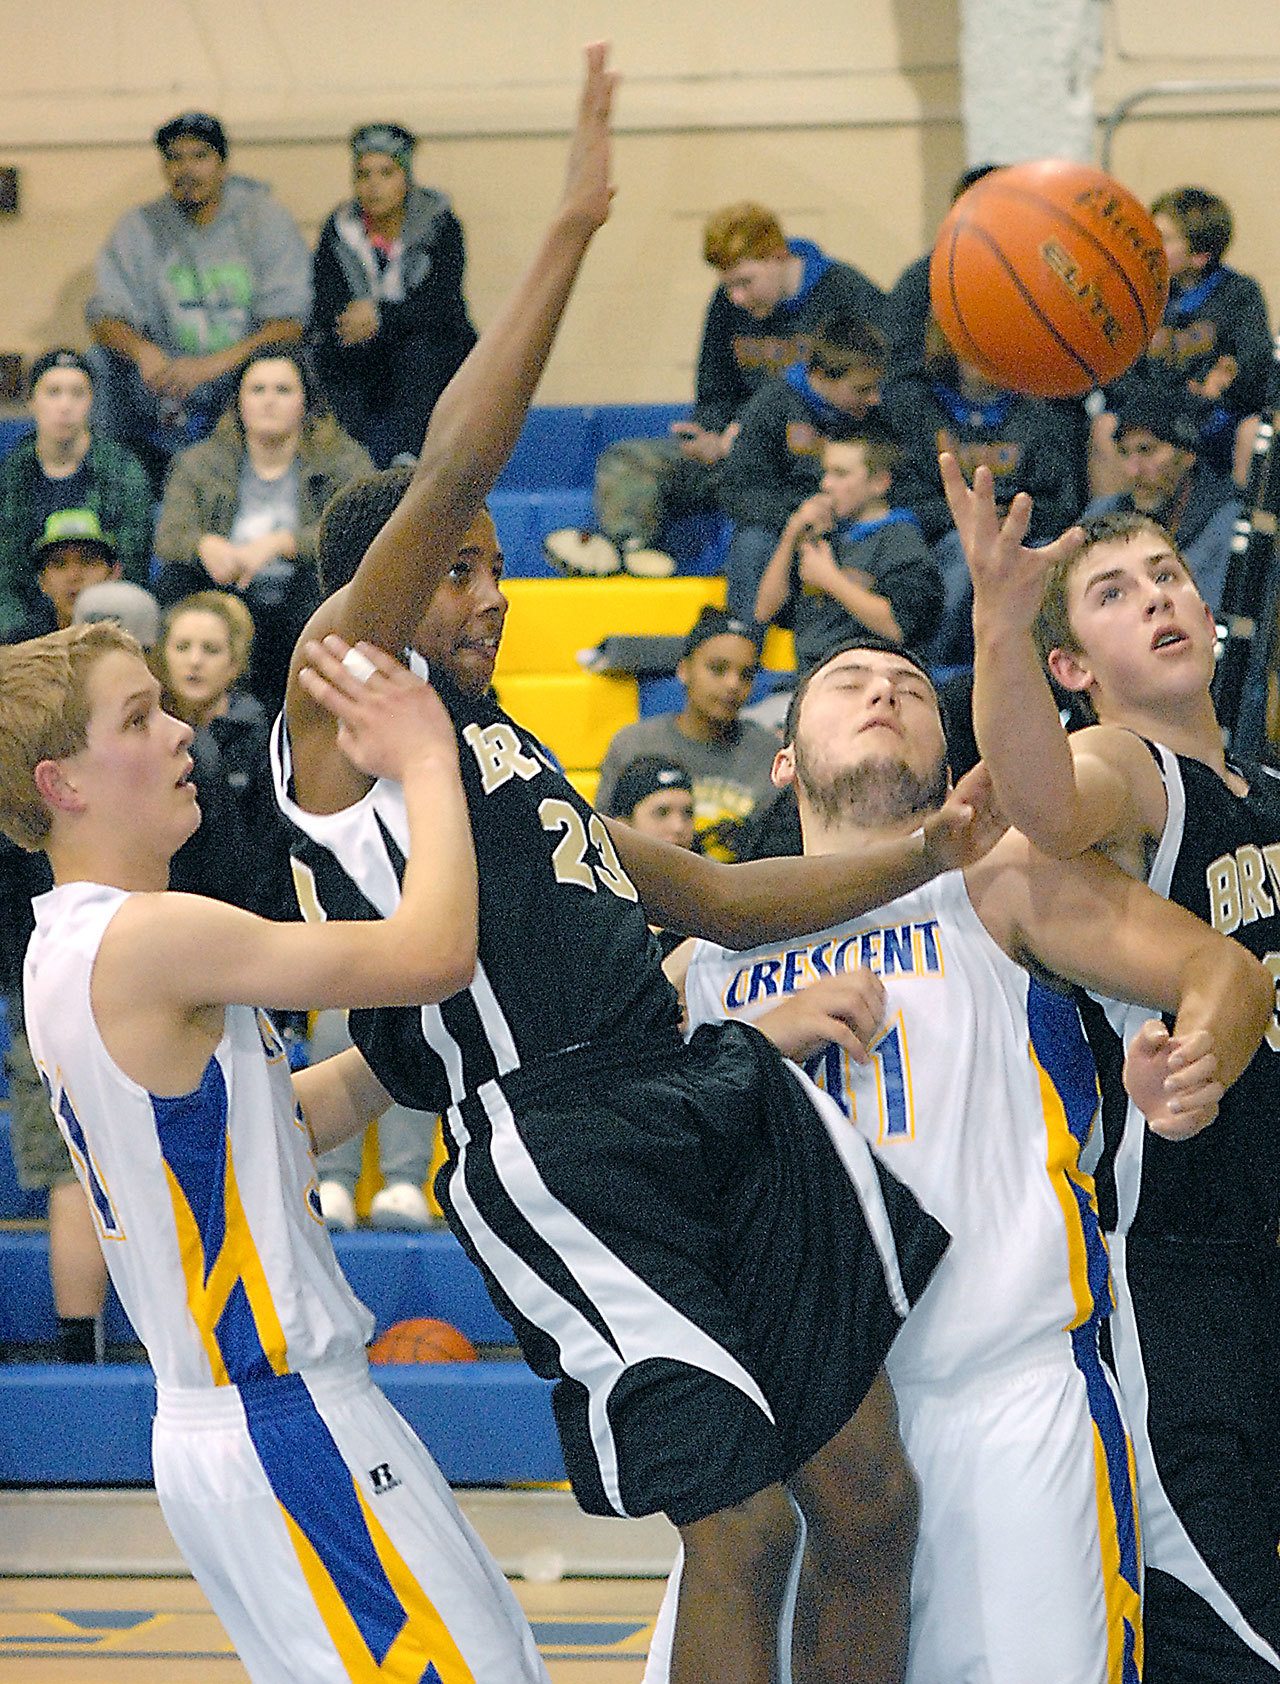 Keith Thorpe/Peninsula Daily News                                In a scramble under the hoop, Peter Johnson of Crescent, Jamari Signor of Clallam Bay, Wyatt McNeece of Crescent and Ryan McCoy of Clallam Bay fight for a rebound in the second quarter on friday at Crescent High School in Joyce.